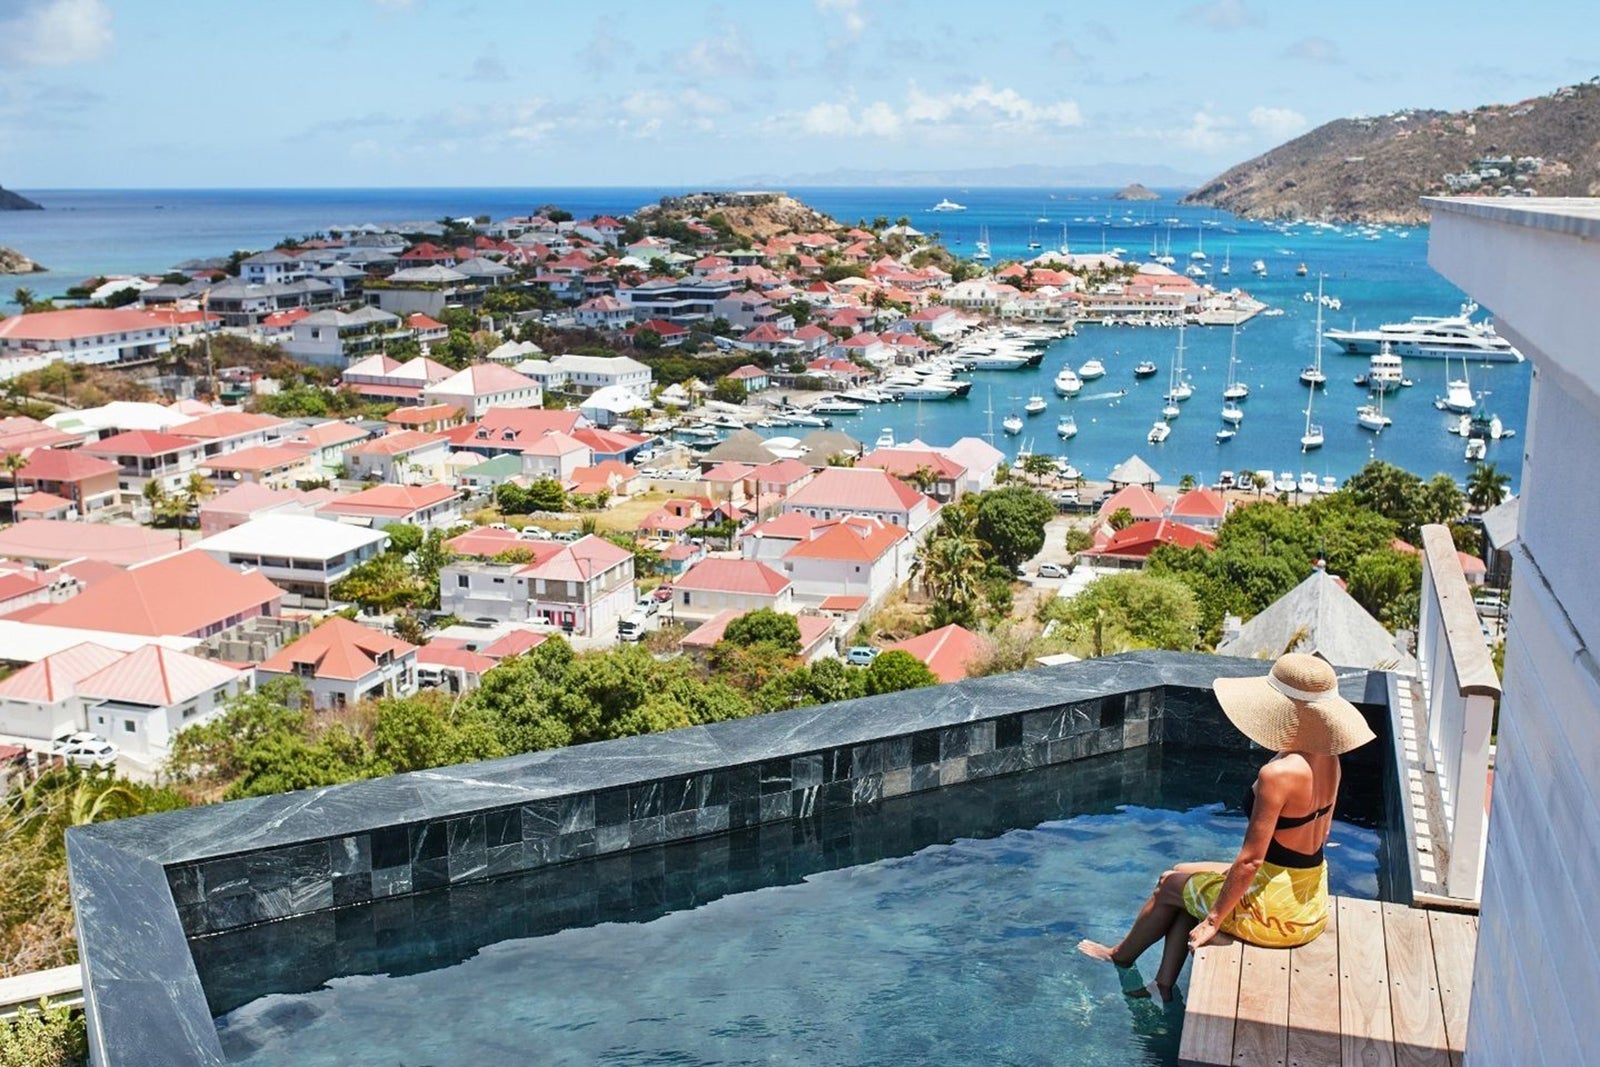 Hotel Le Village St Barth Review: What To REALLY Expect If You Stay